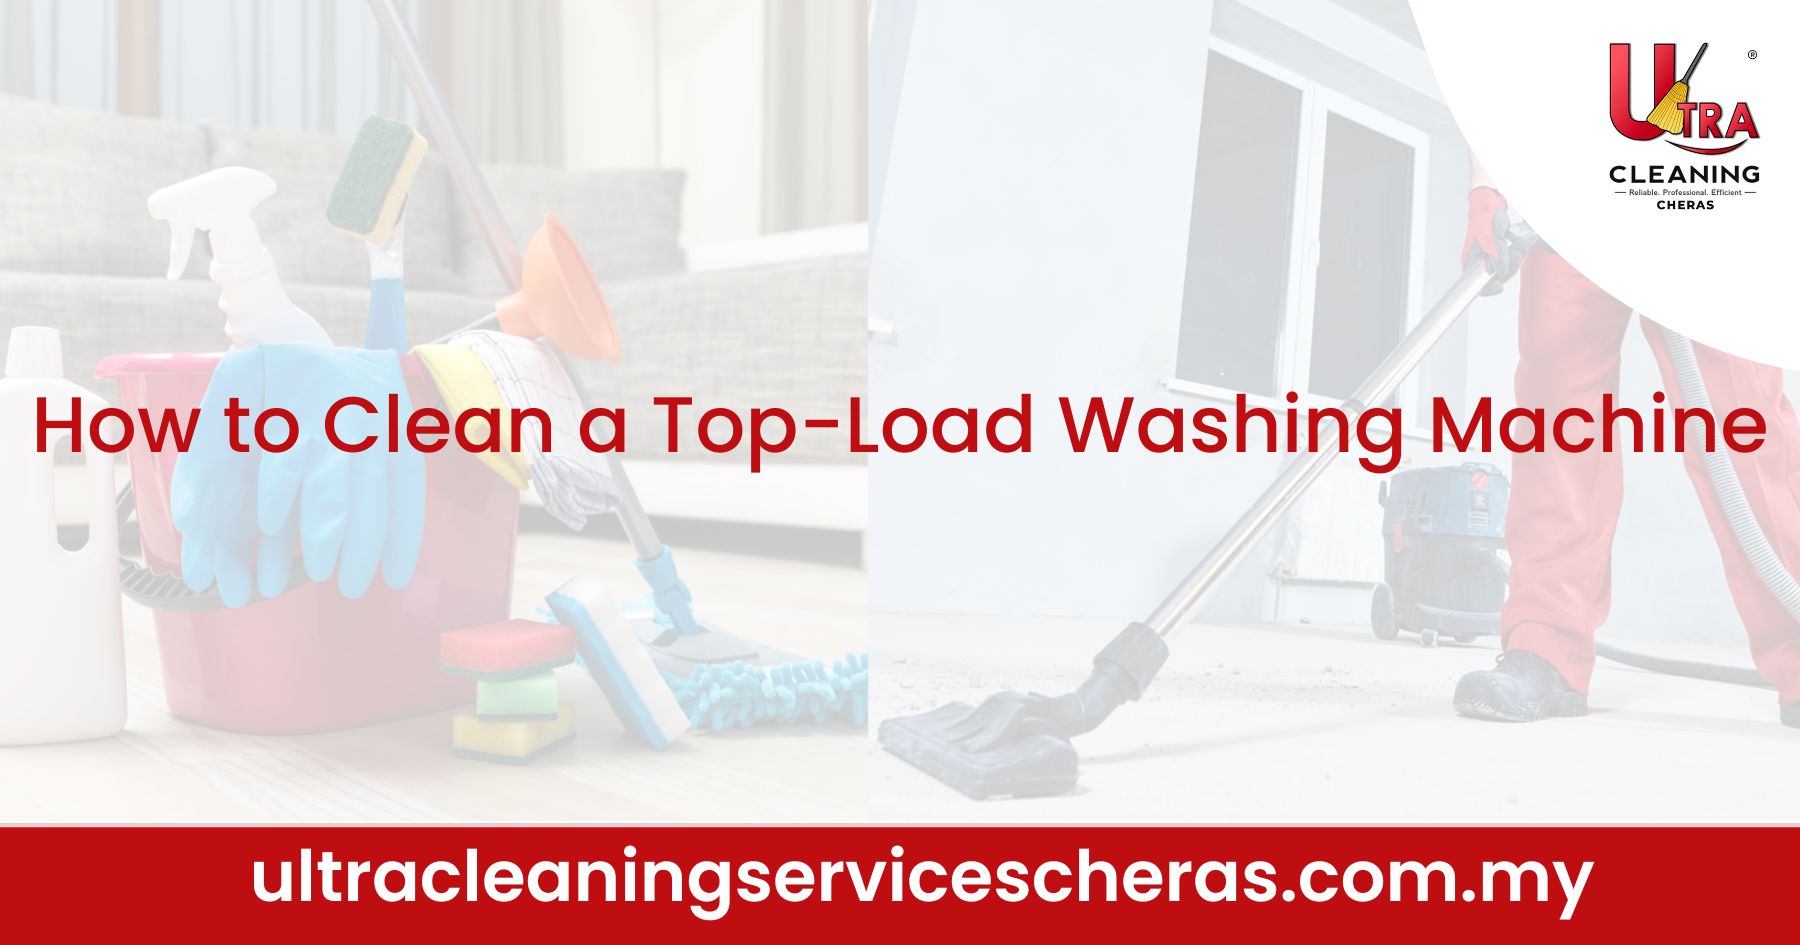 How to Clean a Top-Load Washing Machine